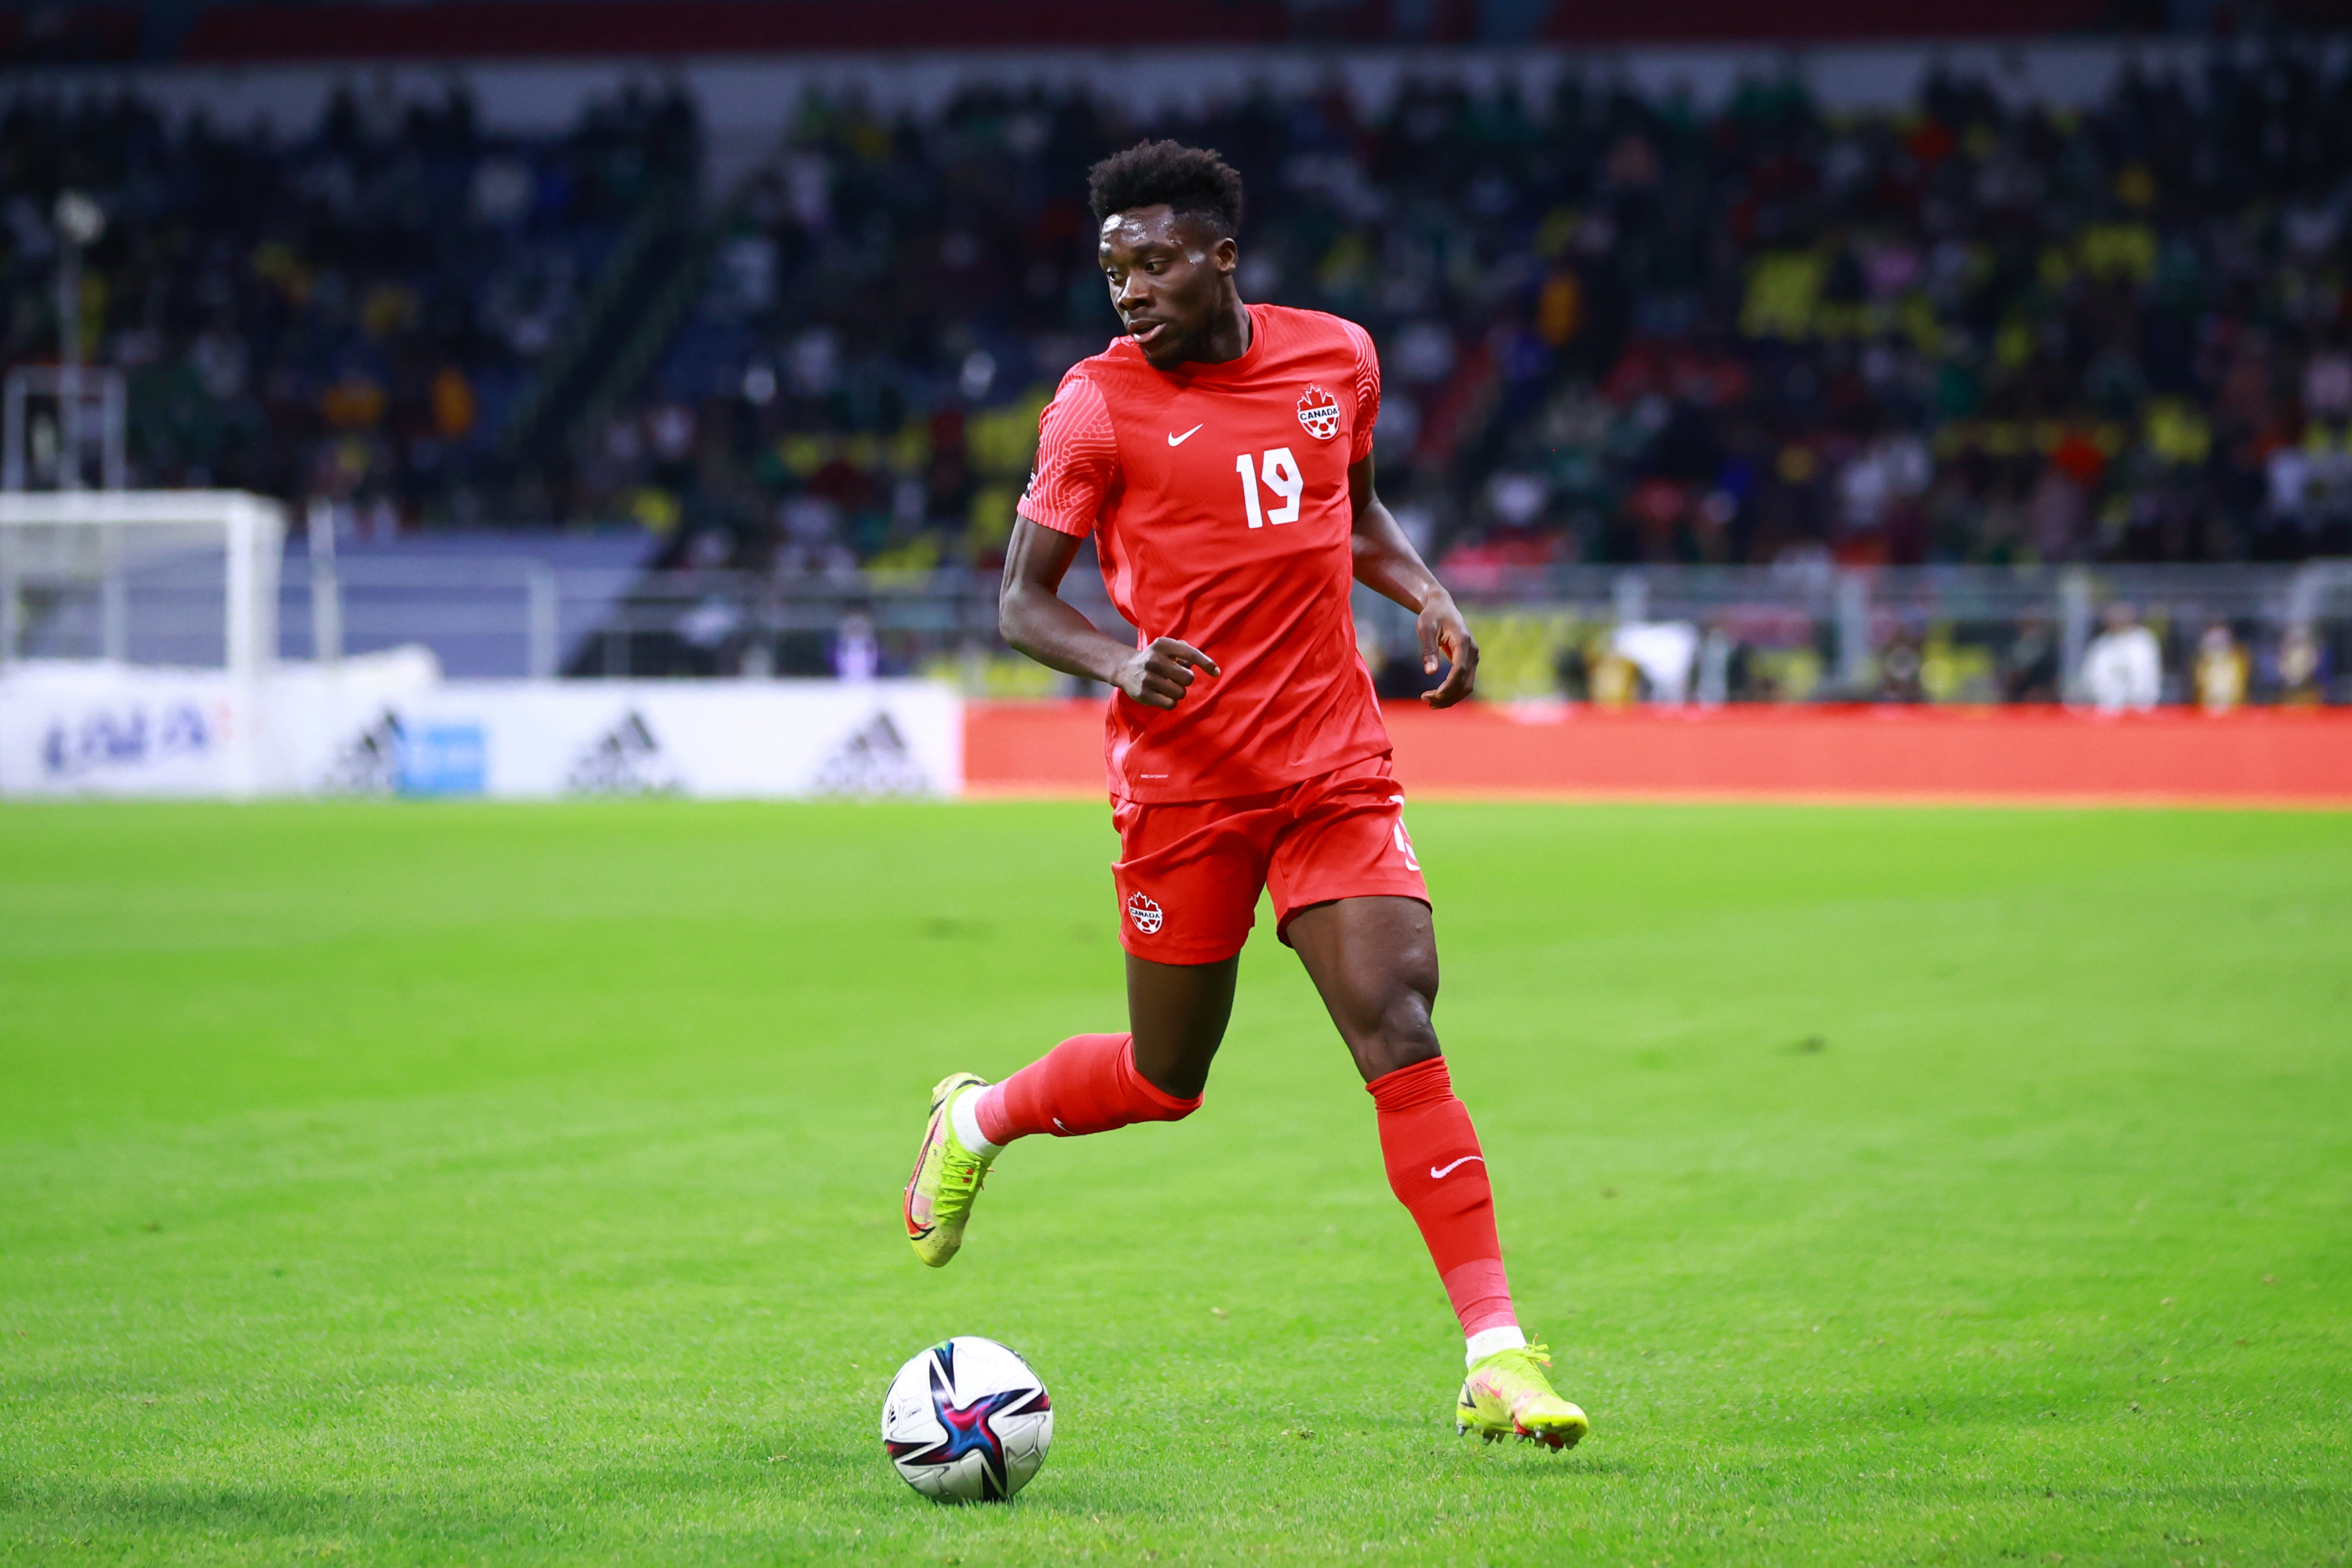 Alphonso Davies was born in a Ghanaian refugee camp and has climbed to spearhead Canada’s first World Cup appearance since 1986